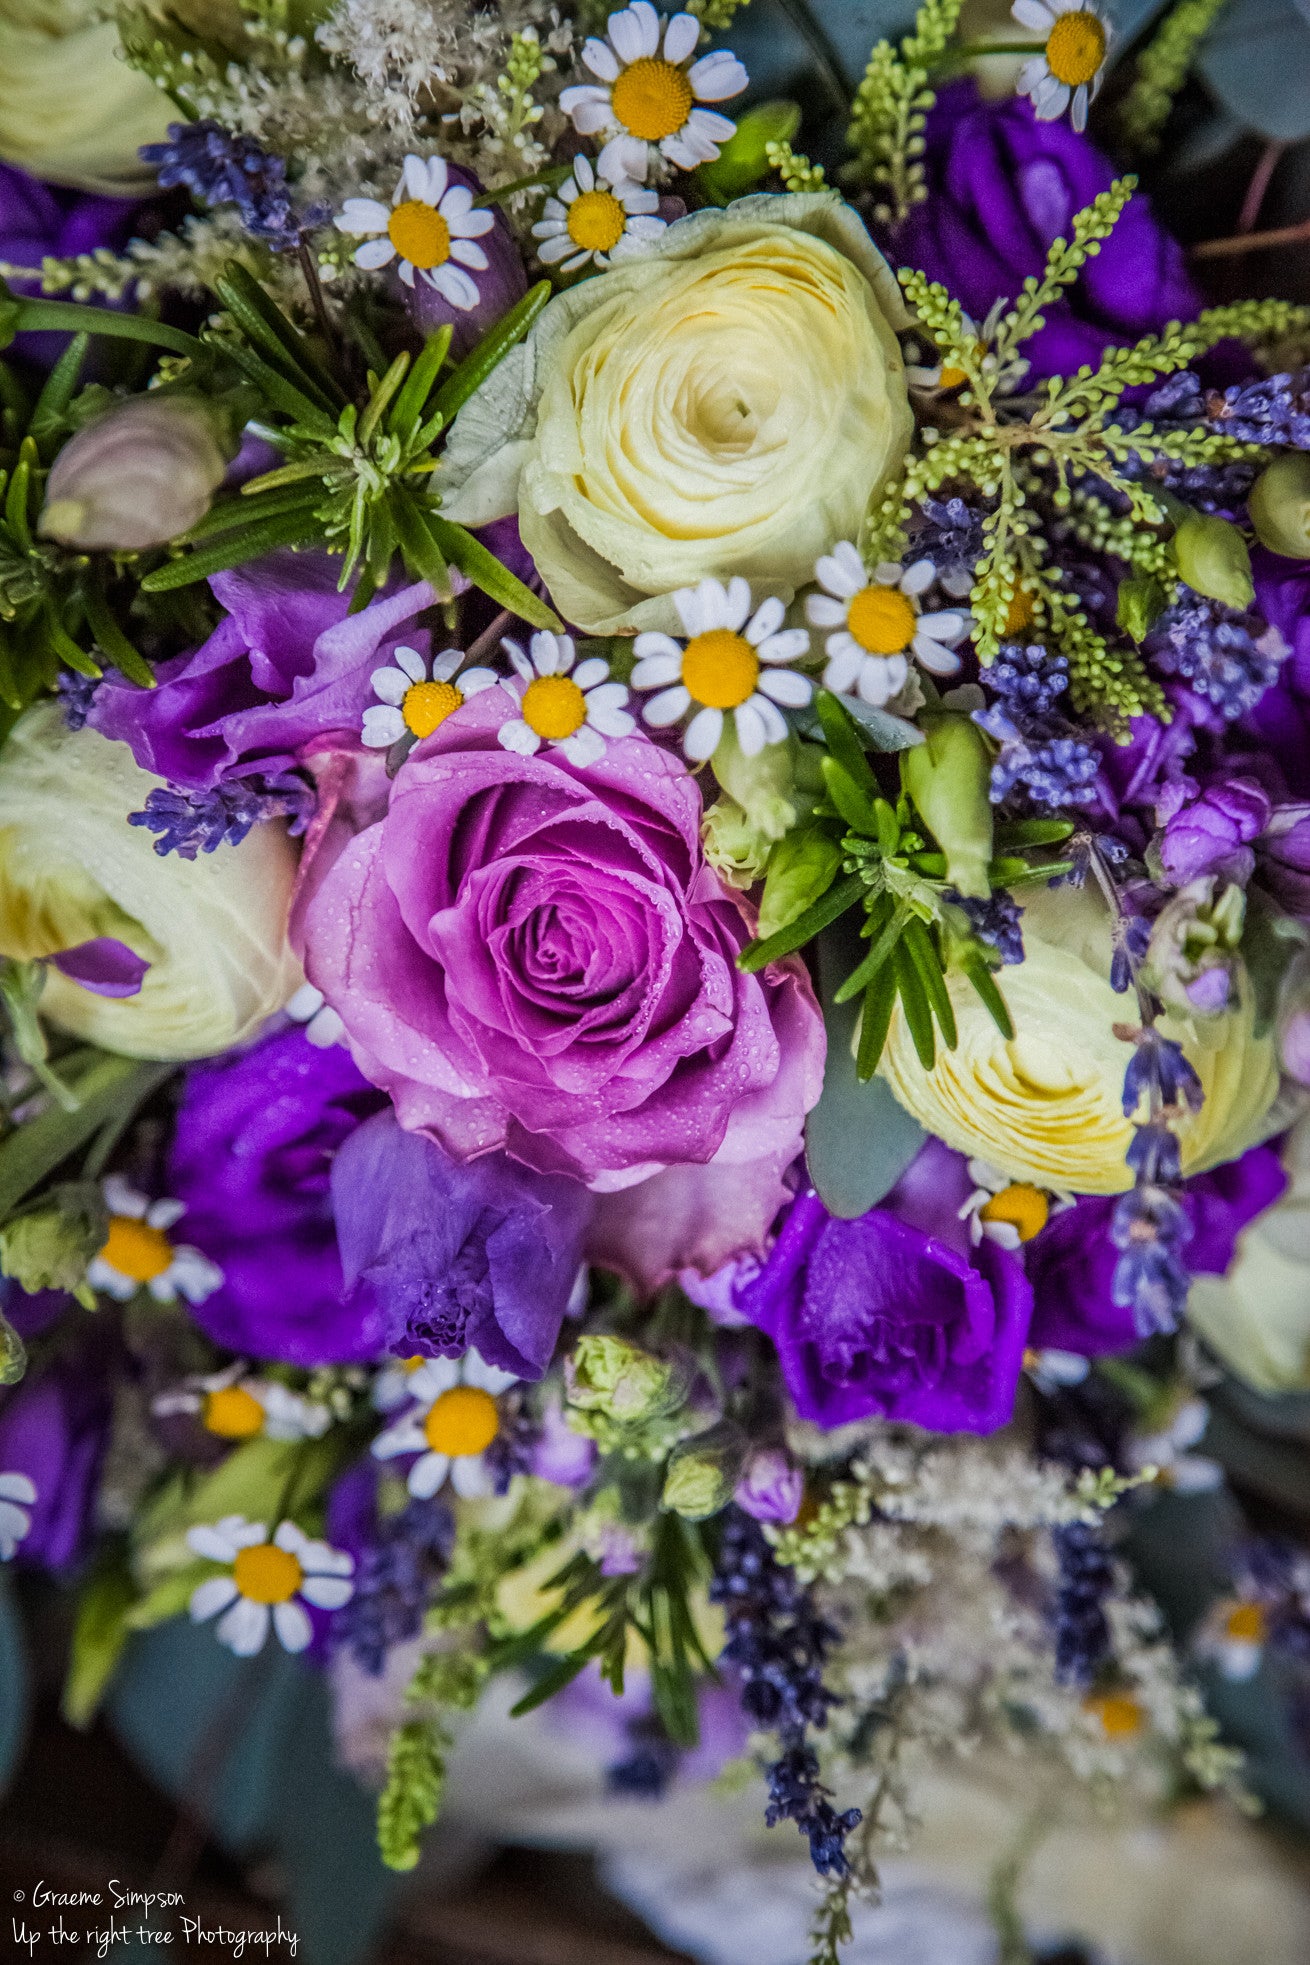 Bride's bouquet with cream Ranunculus, grape coloured Hyacinths, white Daisies, lilac Roses and Lisianthus, Rosemary and Astilbe.